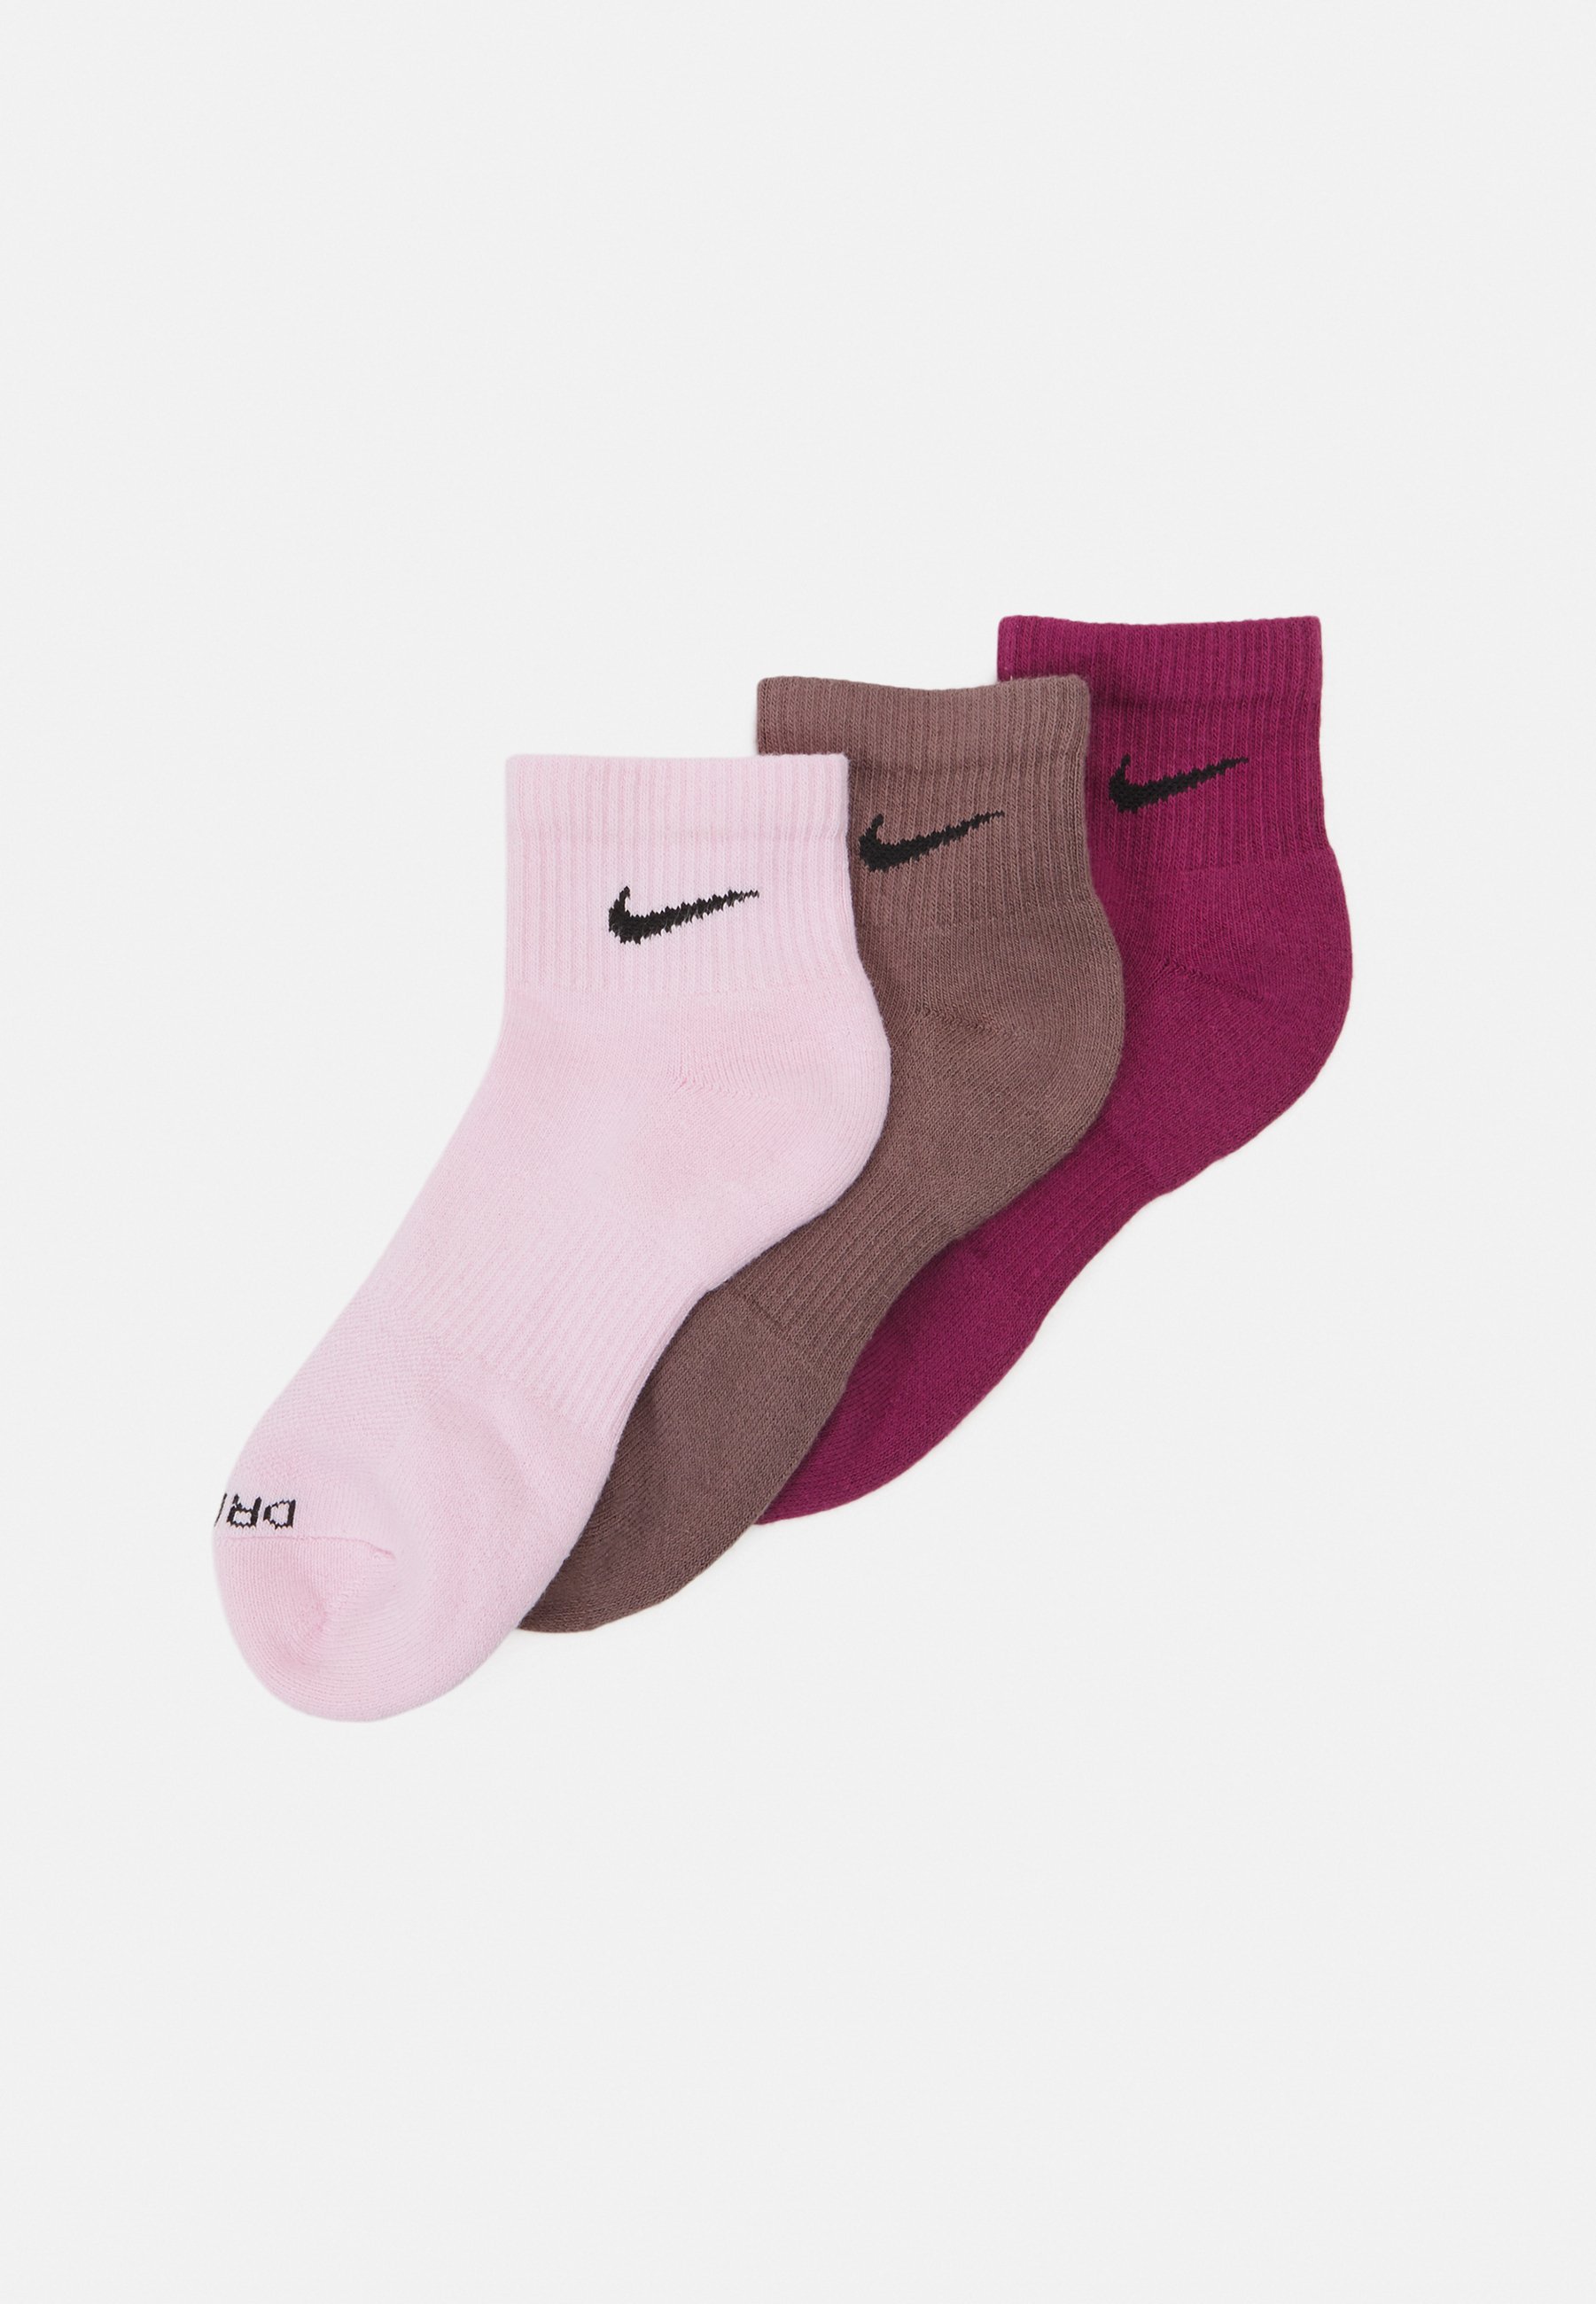 brianna koller recommends Pink Nike Ankle Socks